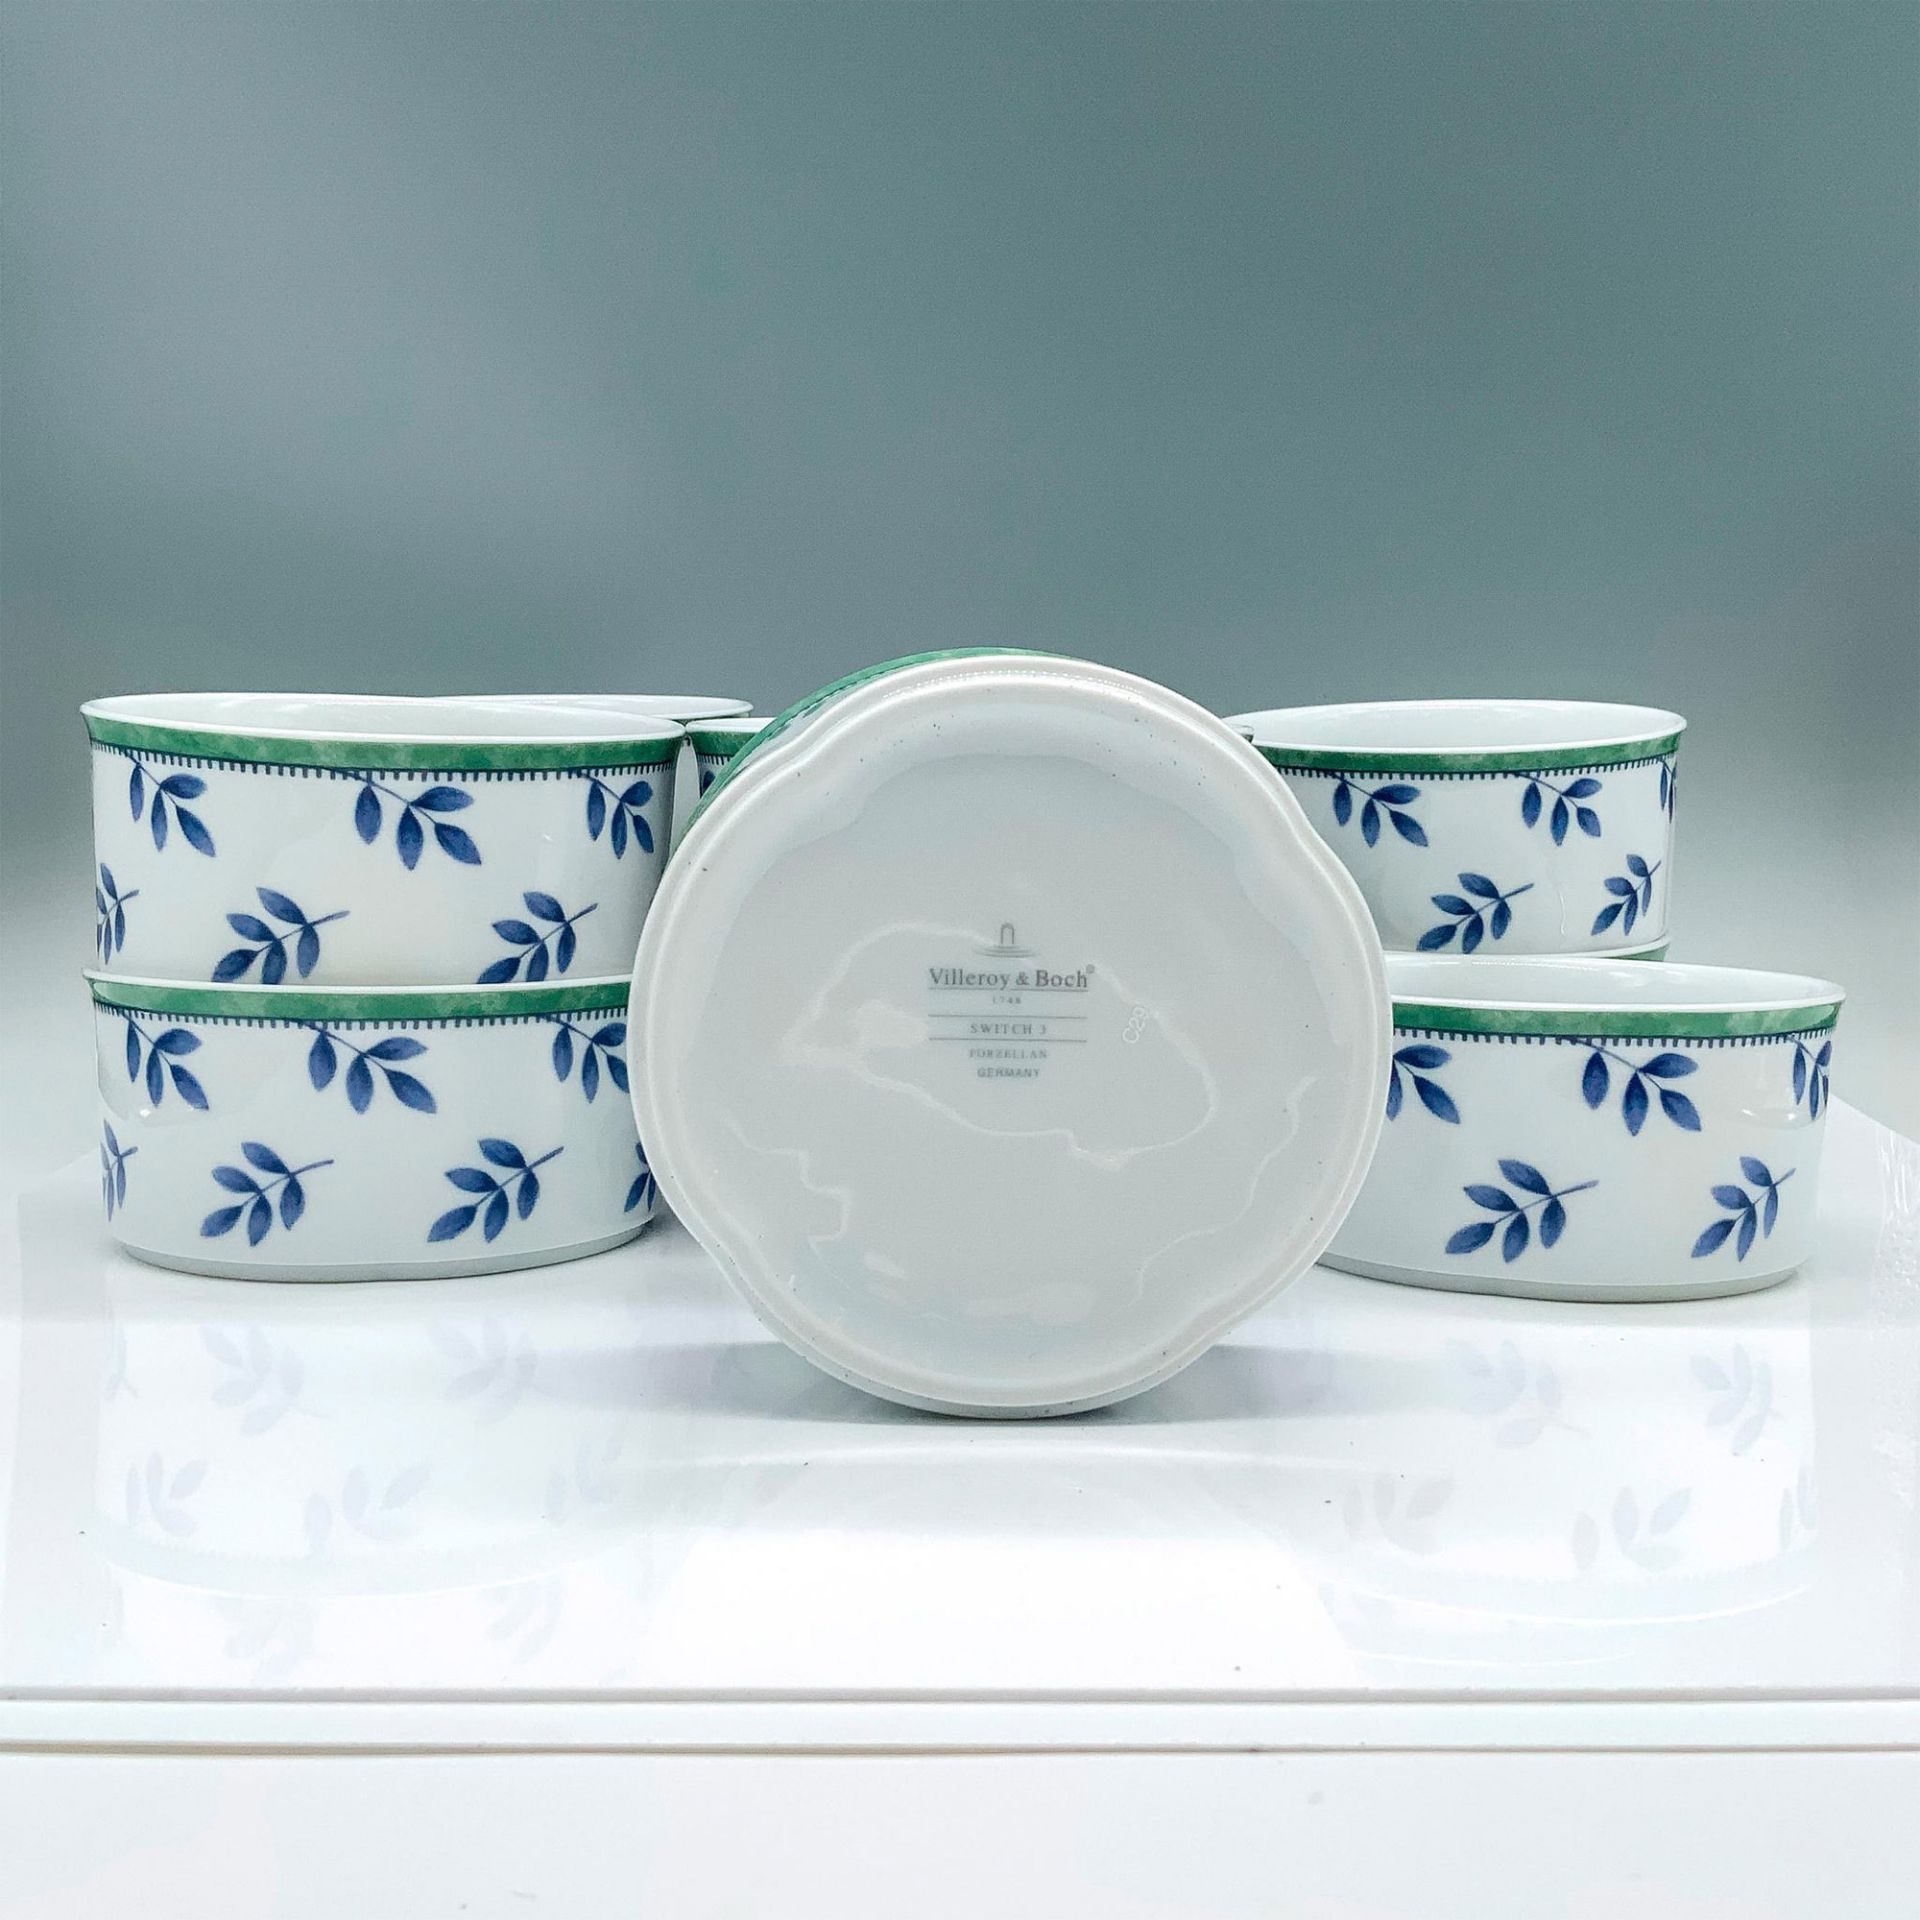 12pc Villeroy and Boch Switch Three Serving Bowls - Image 4 of 4